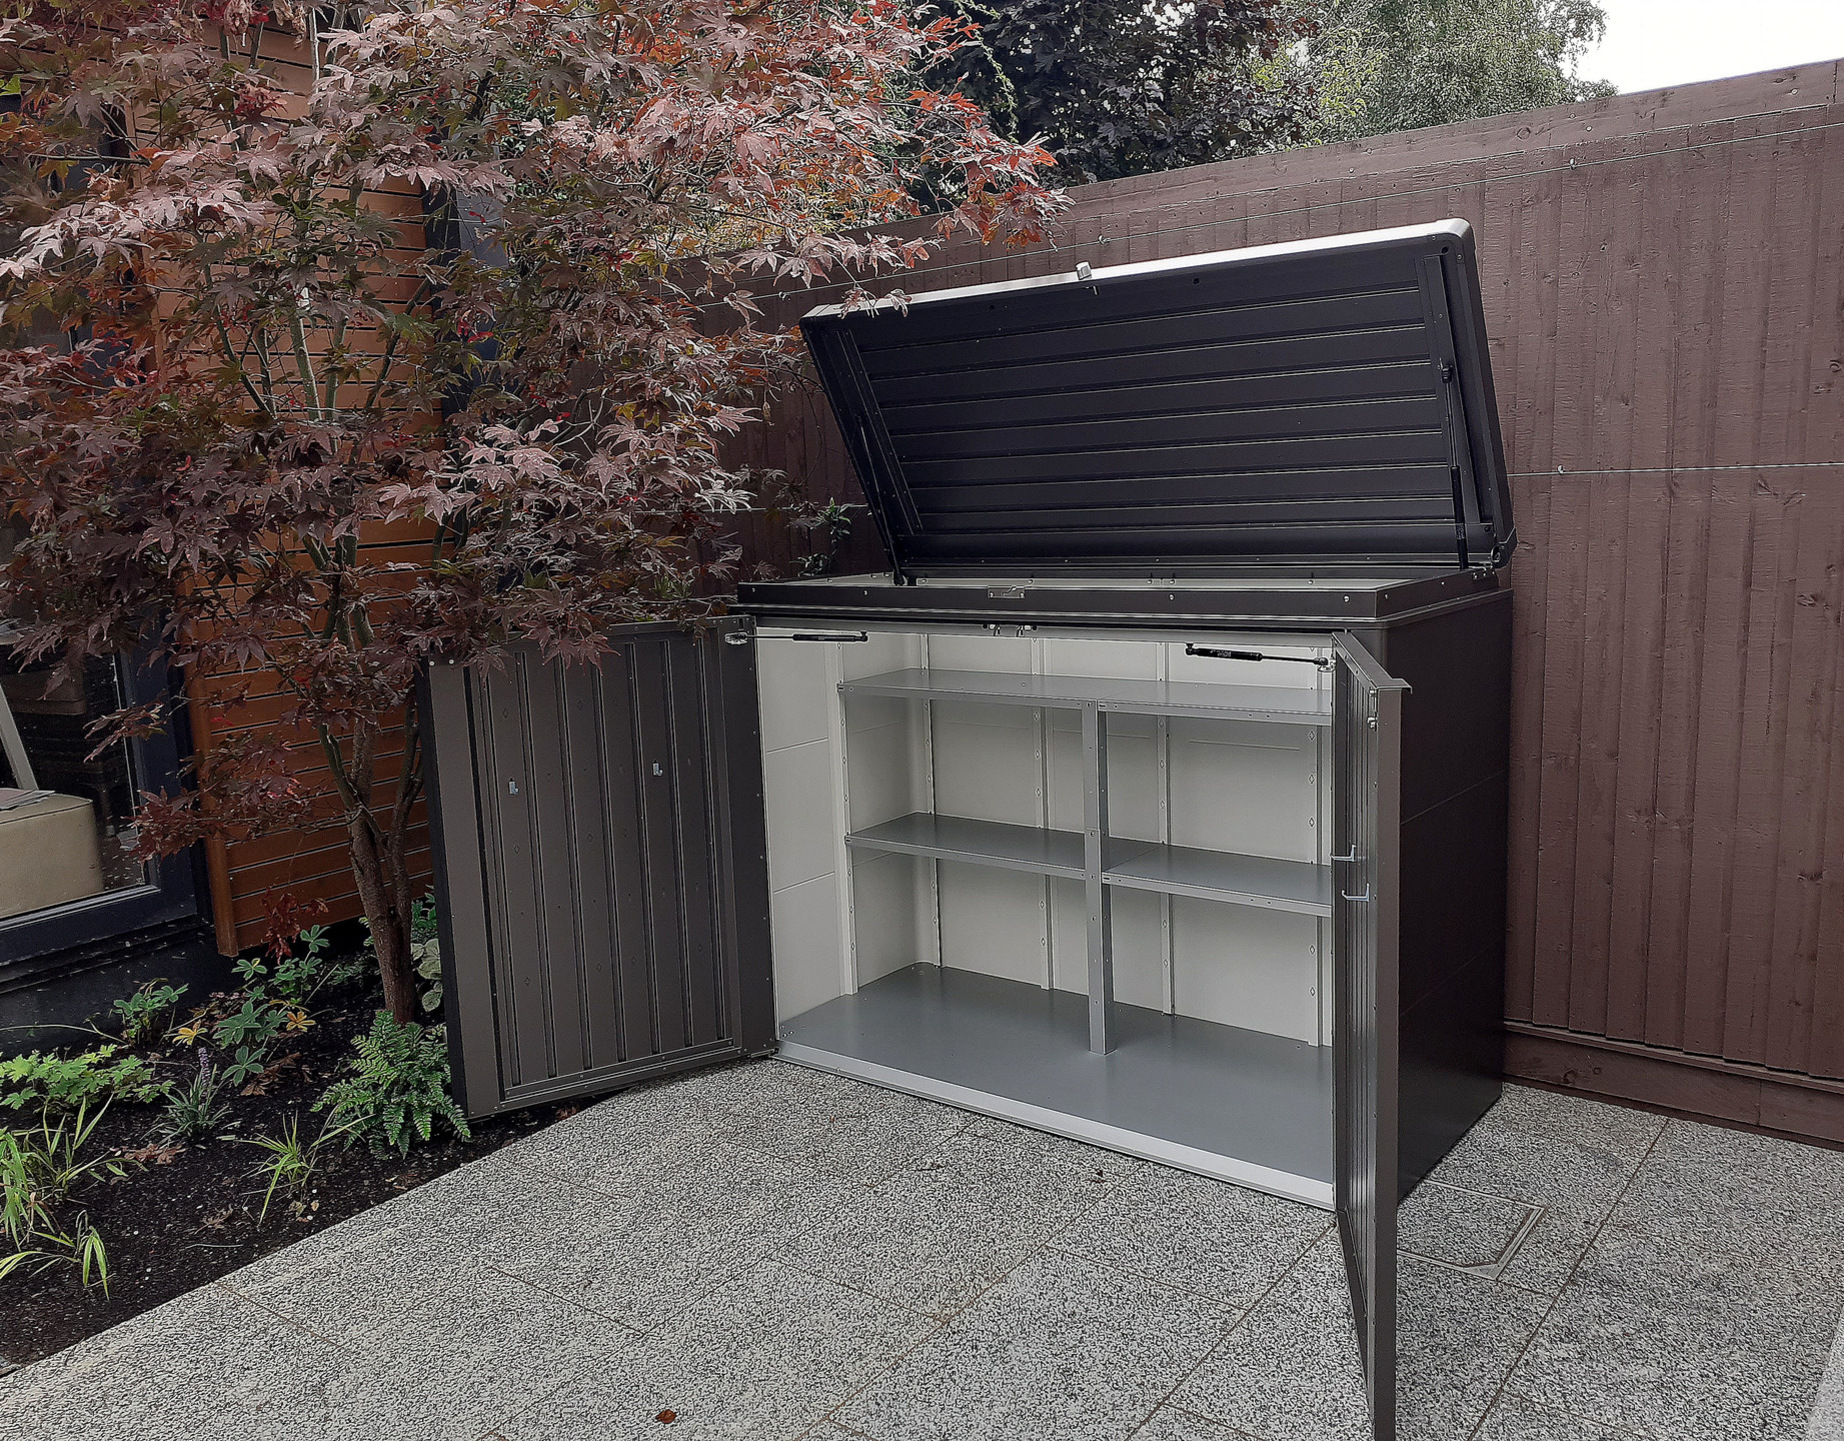 Biohort HighBoard 160 Garden Storage Unit in metallic dark grey fitted with optional intermediate shelving, supplied & fitted in Castleknock, Dublin 15   | Owen Chubb Ireland's Leading supplier of Biohort Garden Sheds & Storage Solutions | FREE Fitting in Dublin